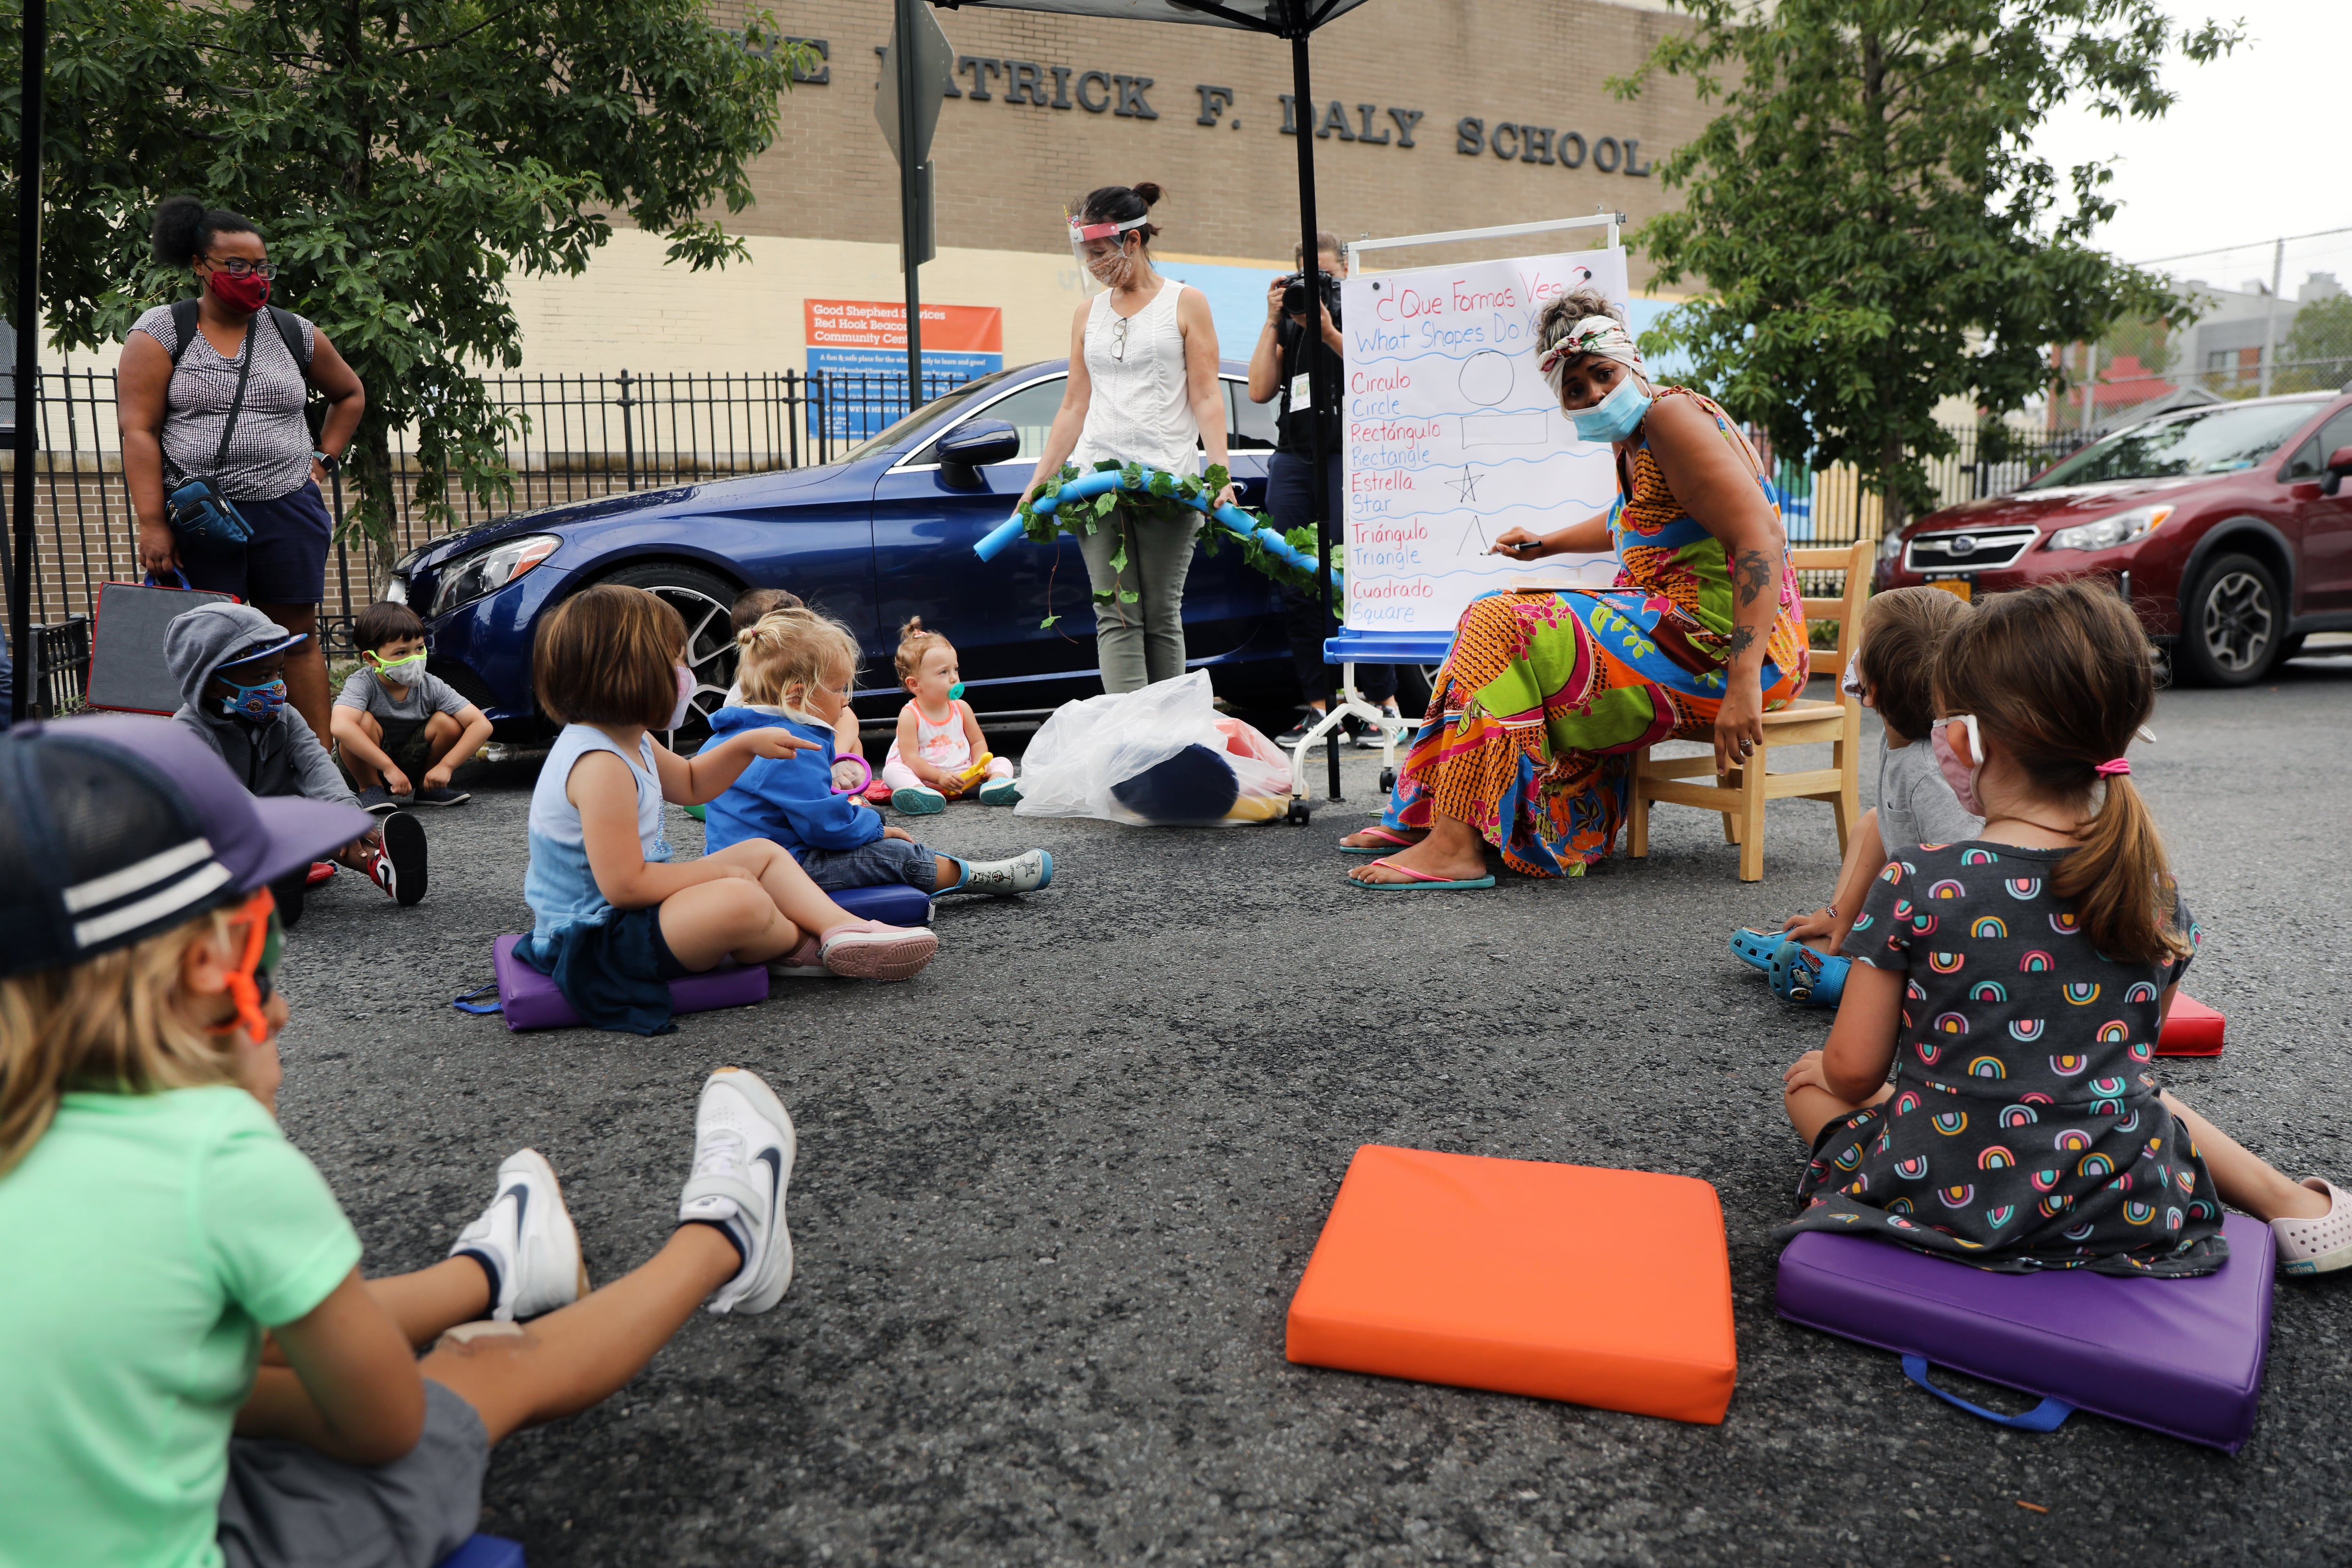 City council members, parents and students participate in an outdoor learning demonstration in front of a public school in the Red Hook neighborhood on September 02, 2020 in the Brooklyn borough of New York City.